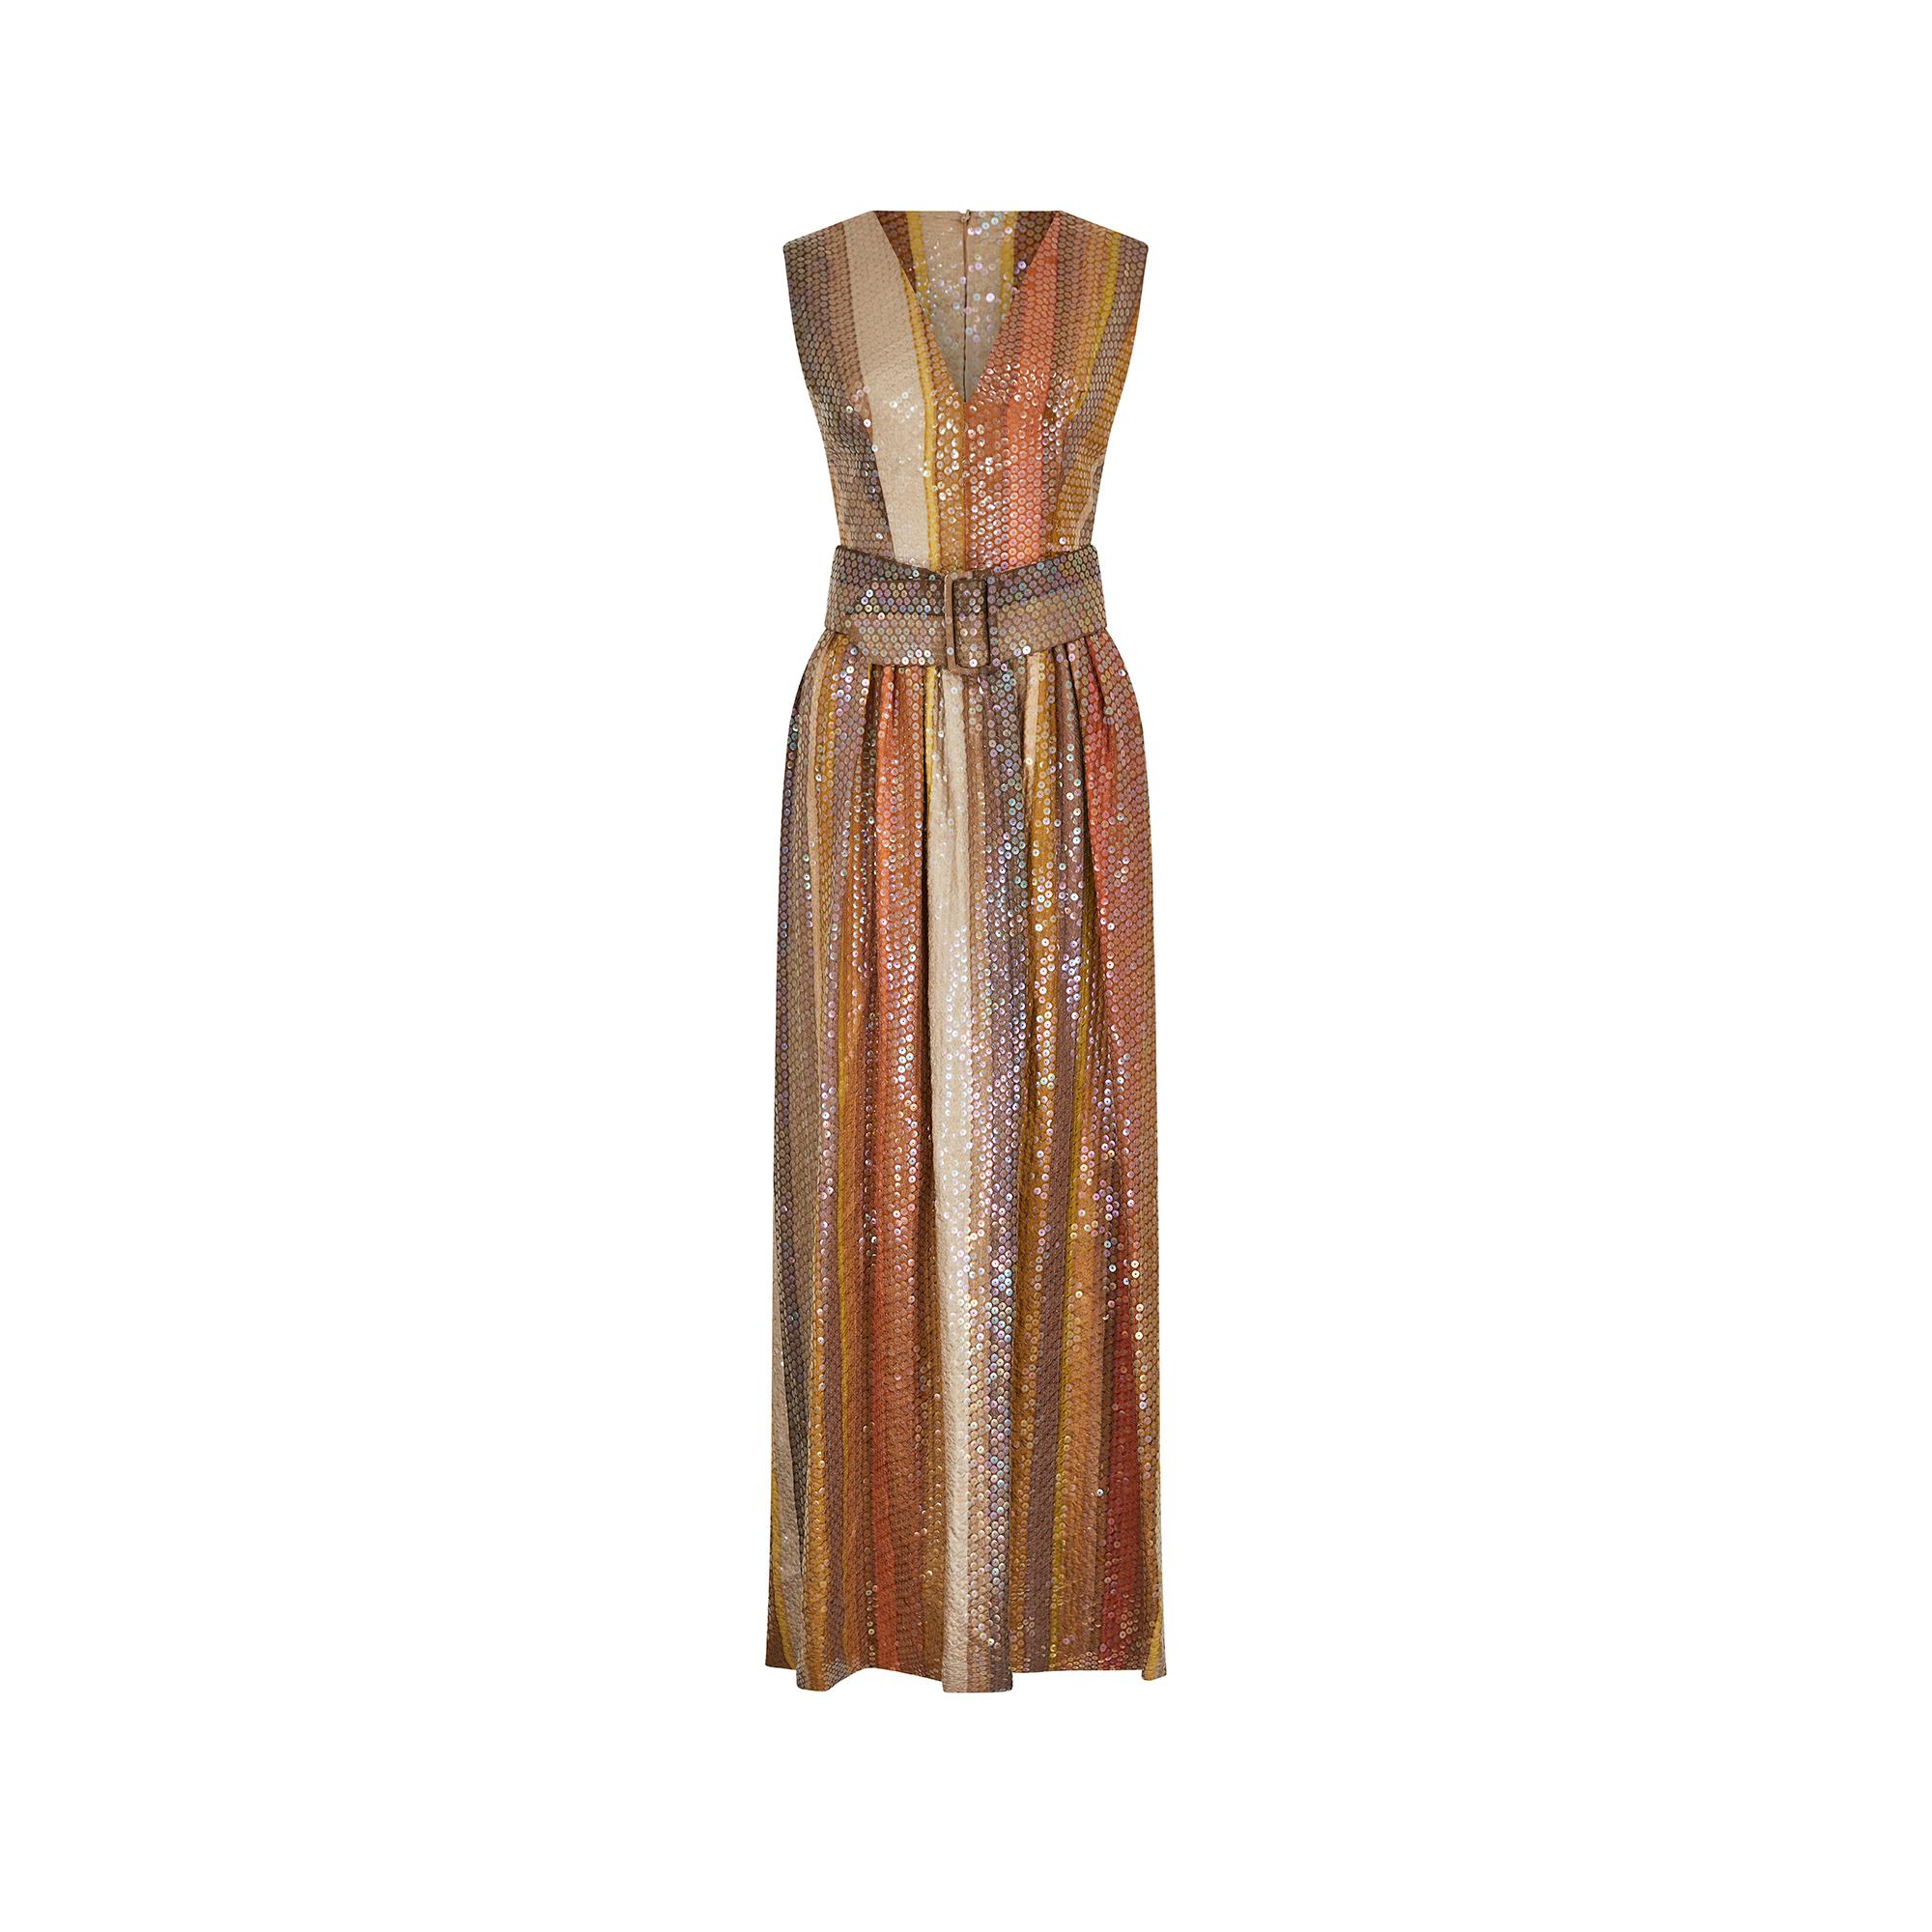 This late 1960s to early 1970s Kaye Walton sequin belted maxi dress exudes glamour and sophistication. The dress features vertical bands of sequins in a tonal range, including copper, golden sand, yellow ochre, taupe and brown.  Designed to flatter